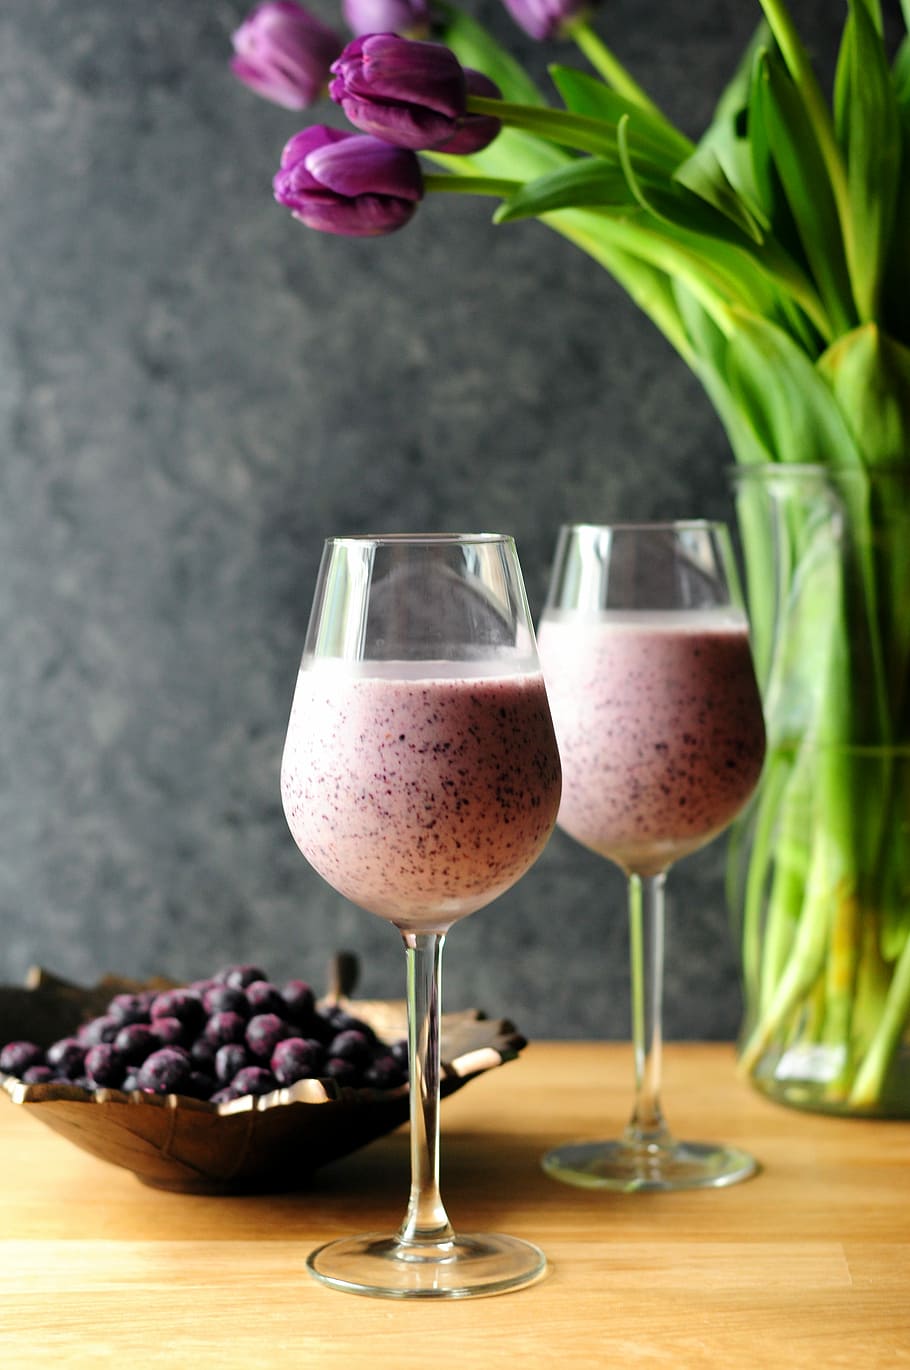 two berry shake on drinking glasses, milkshake in clear wine glasses on brown wooden surface